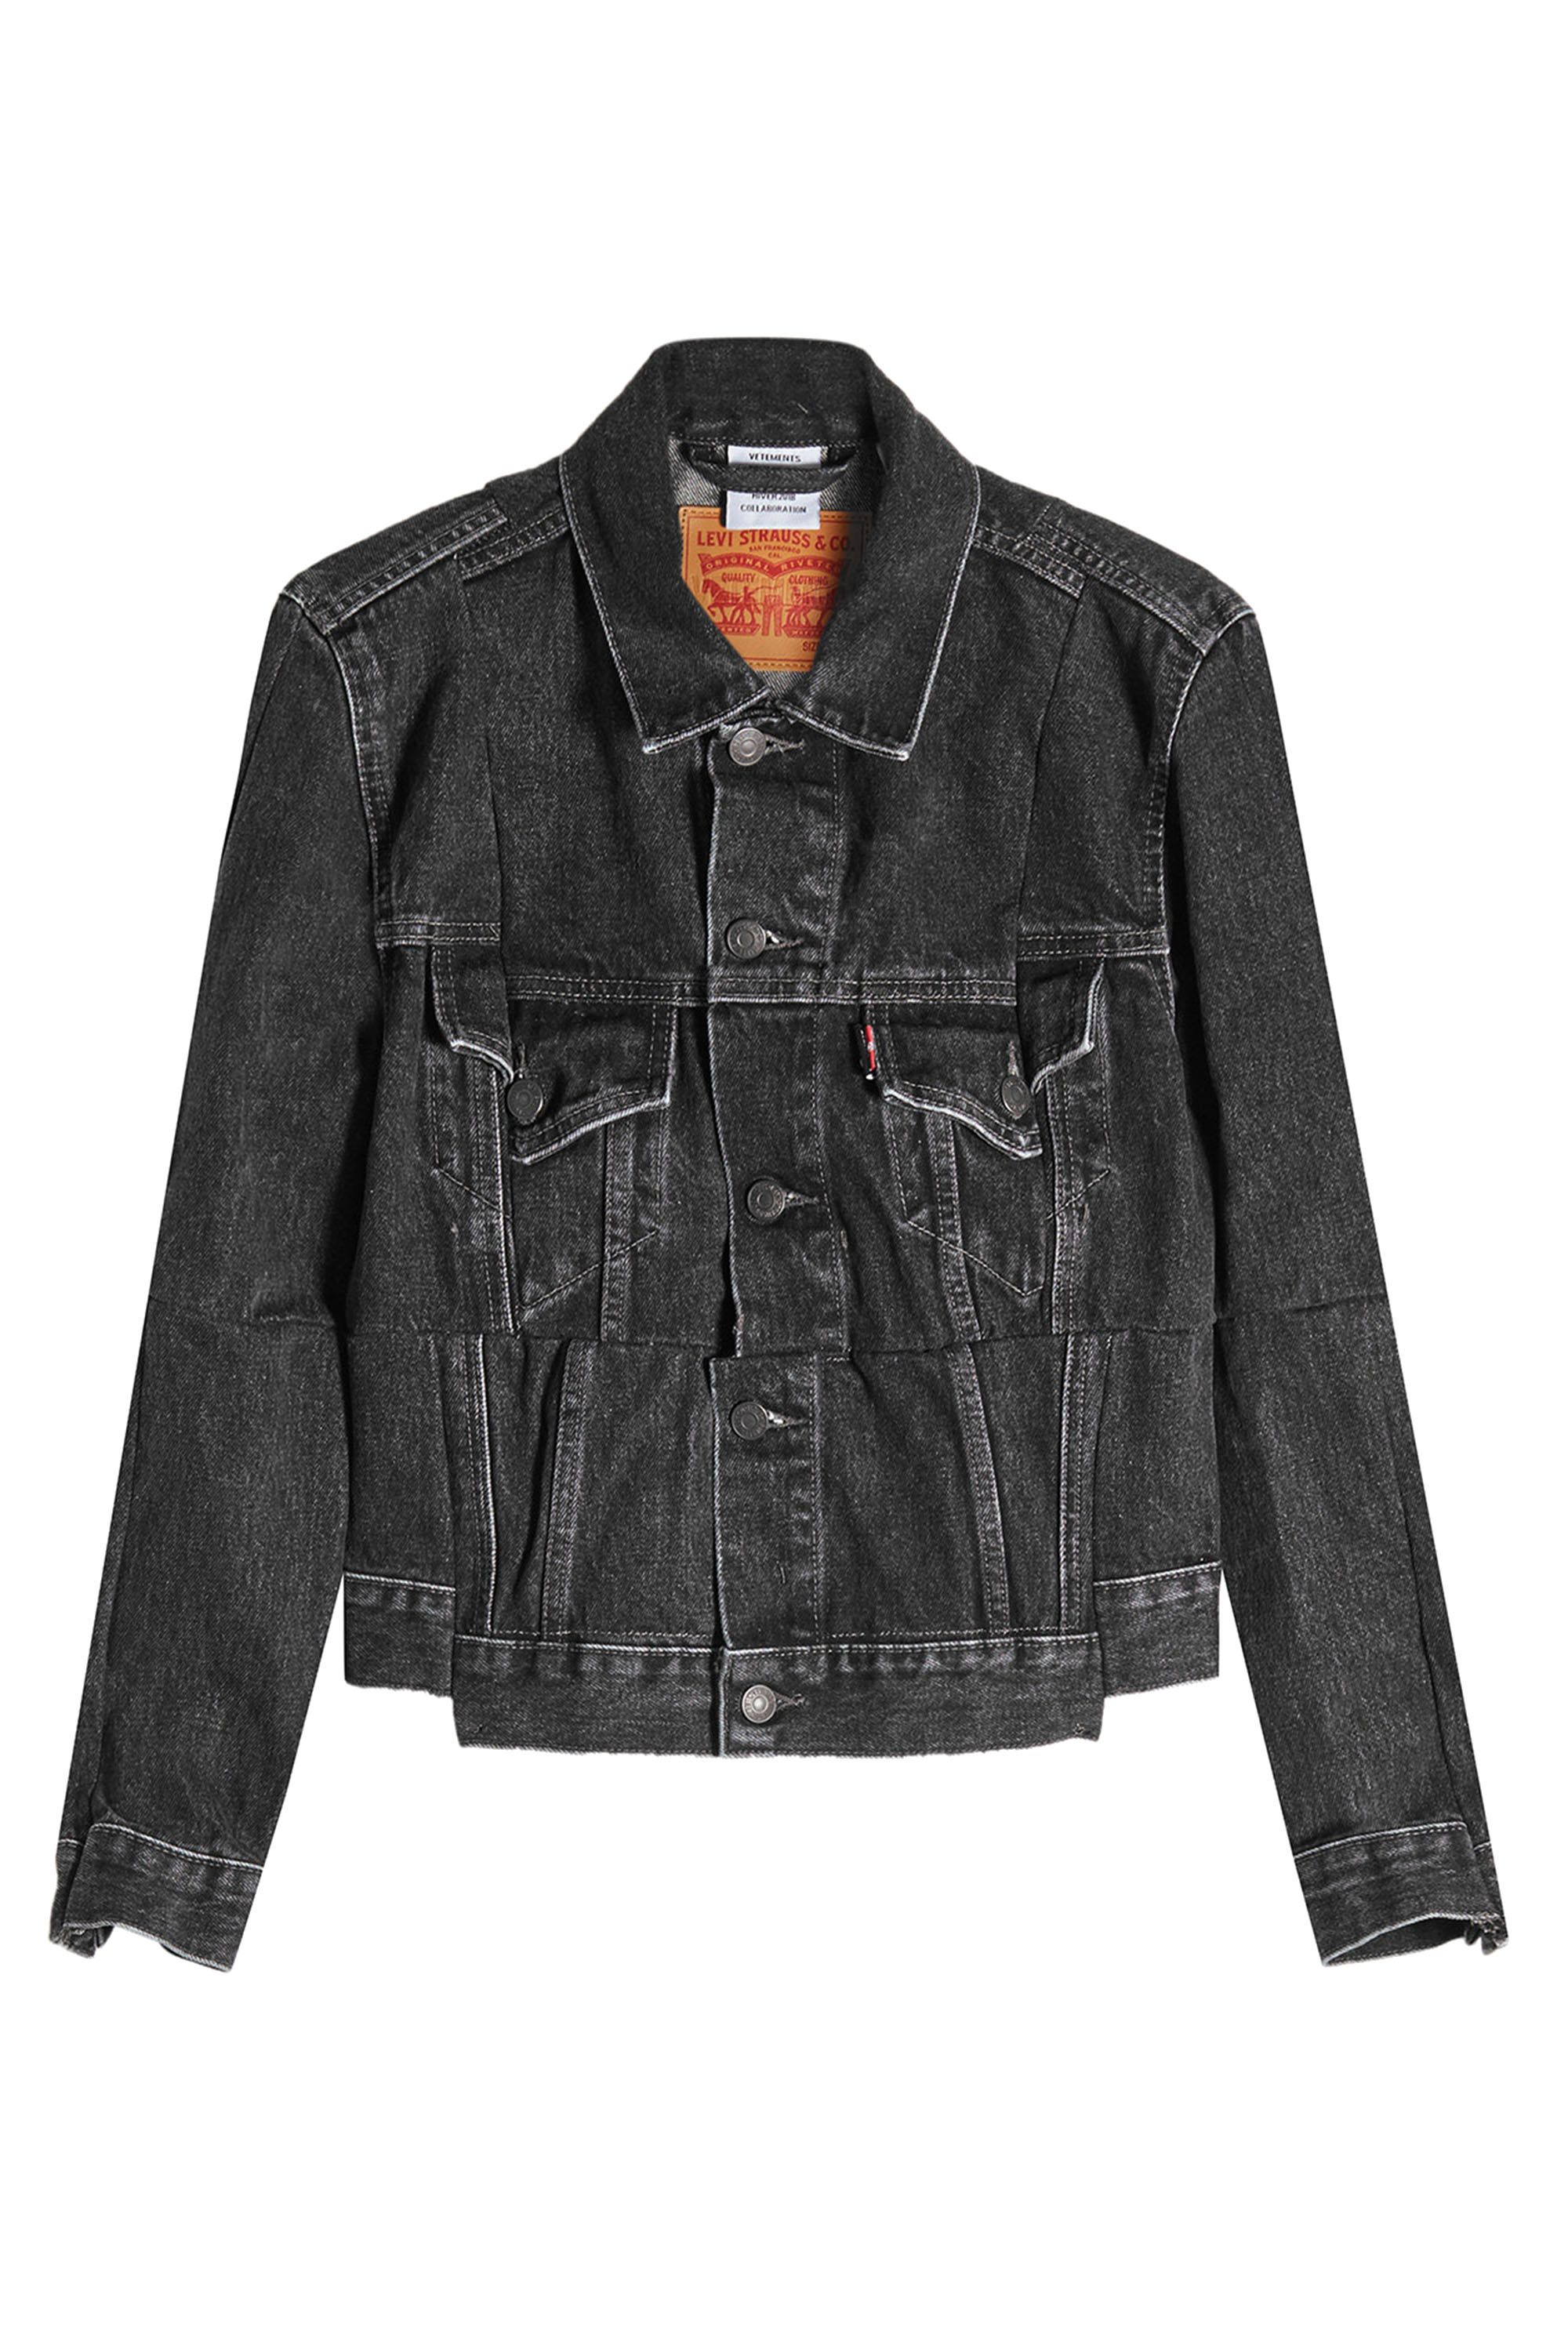 15 Denim Jackets for Women - Classic Jean Jacket Options for 